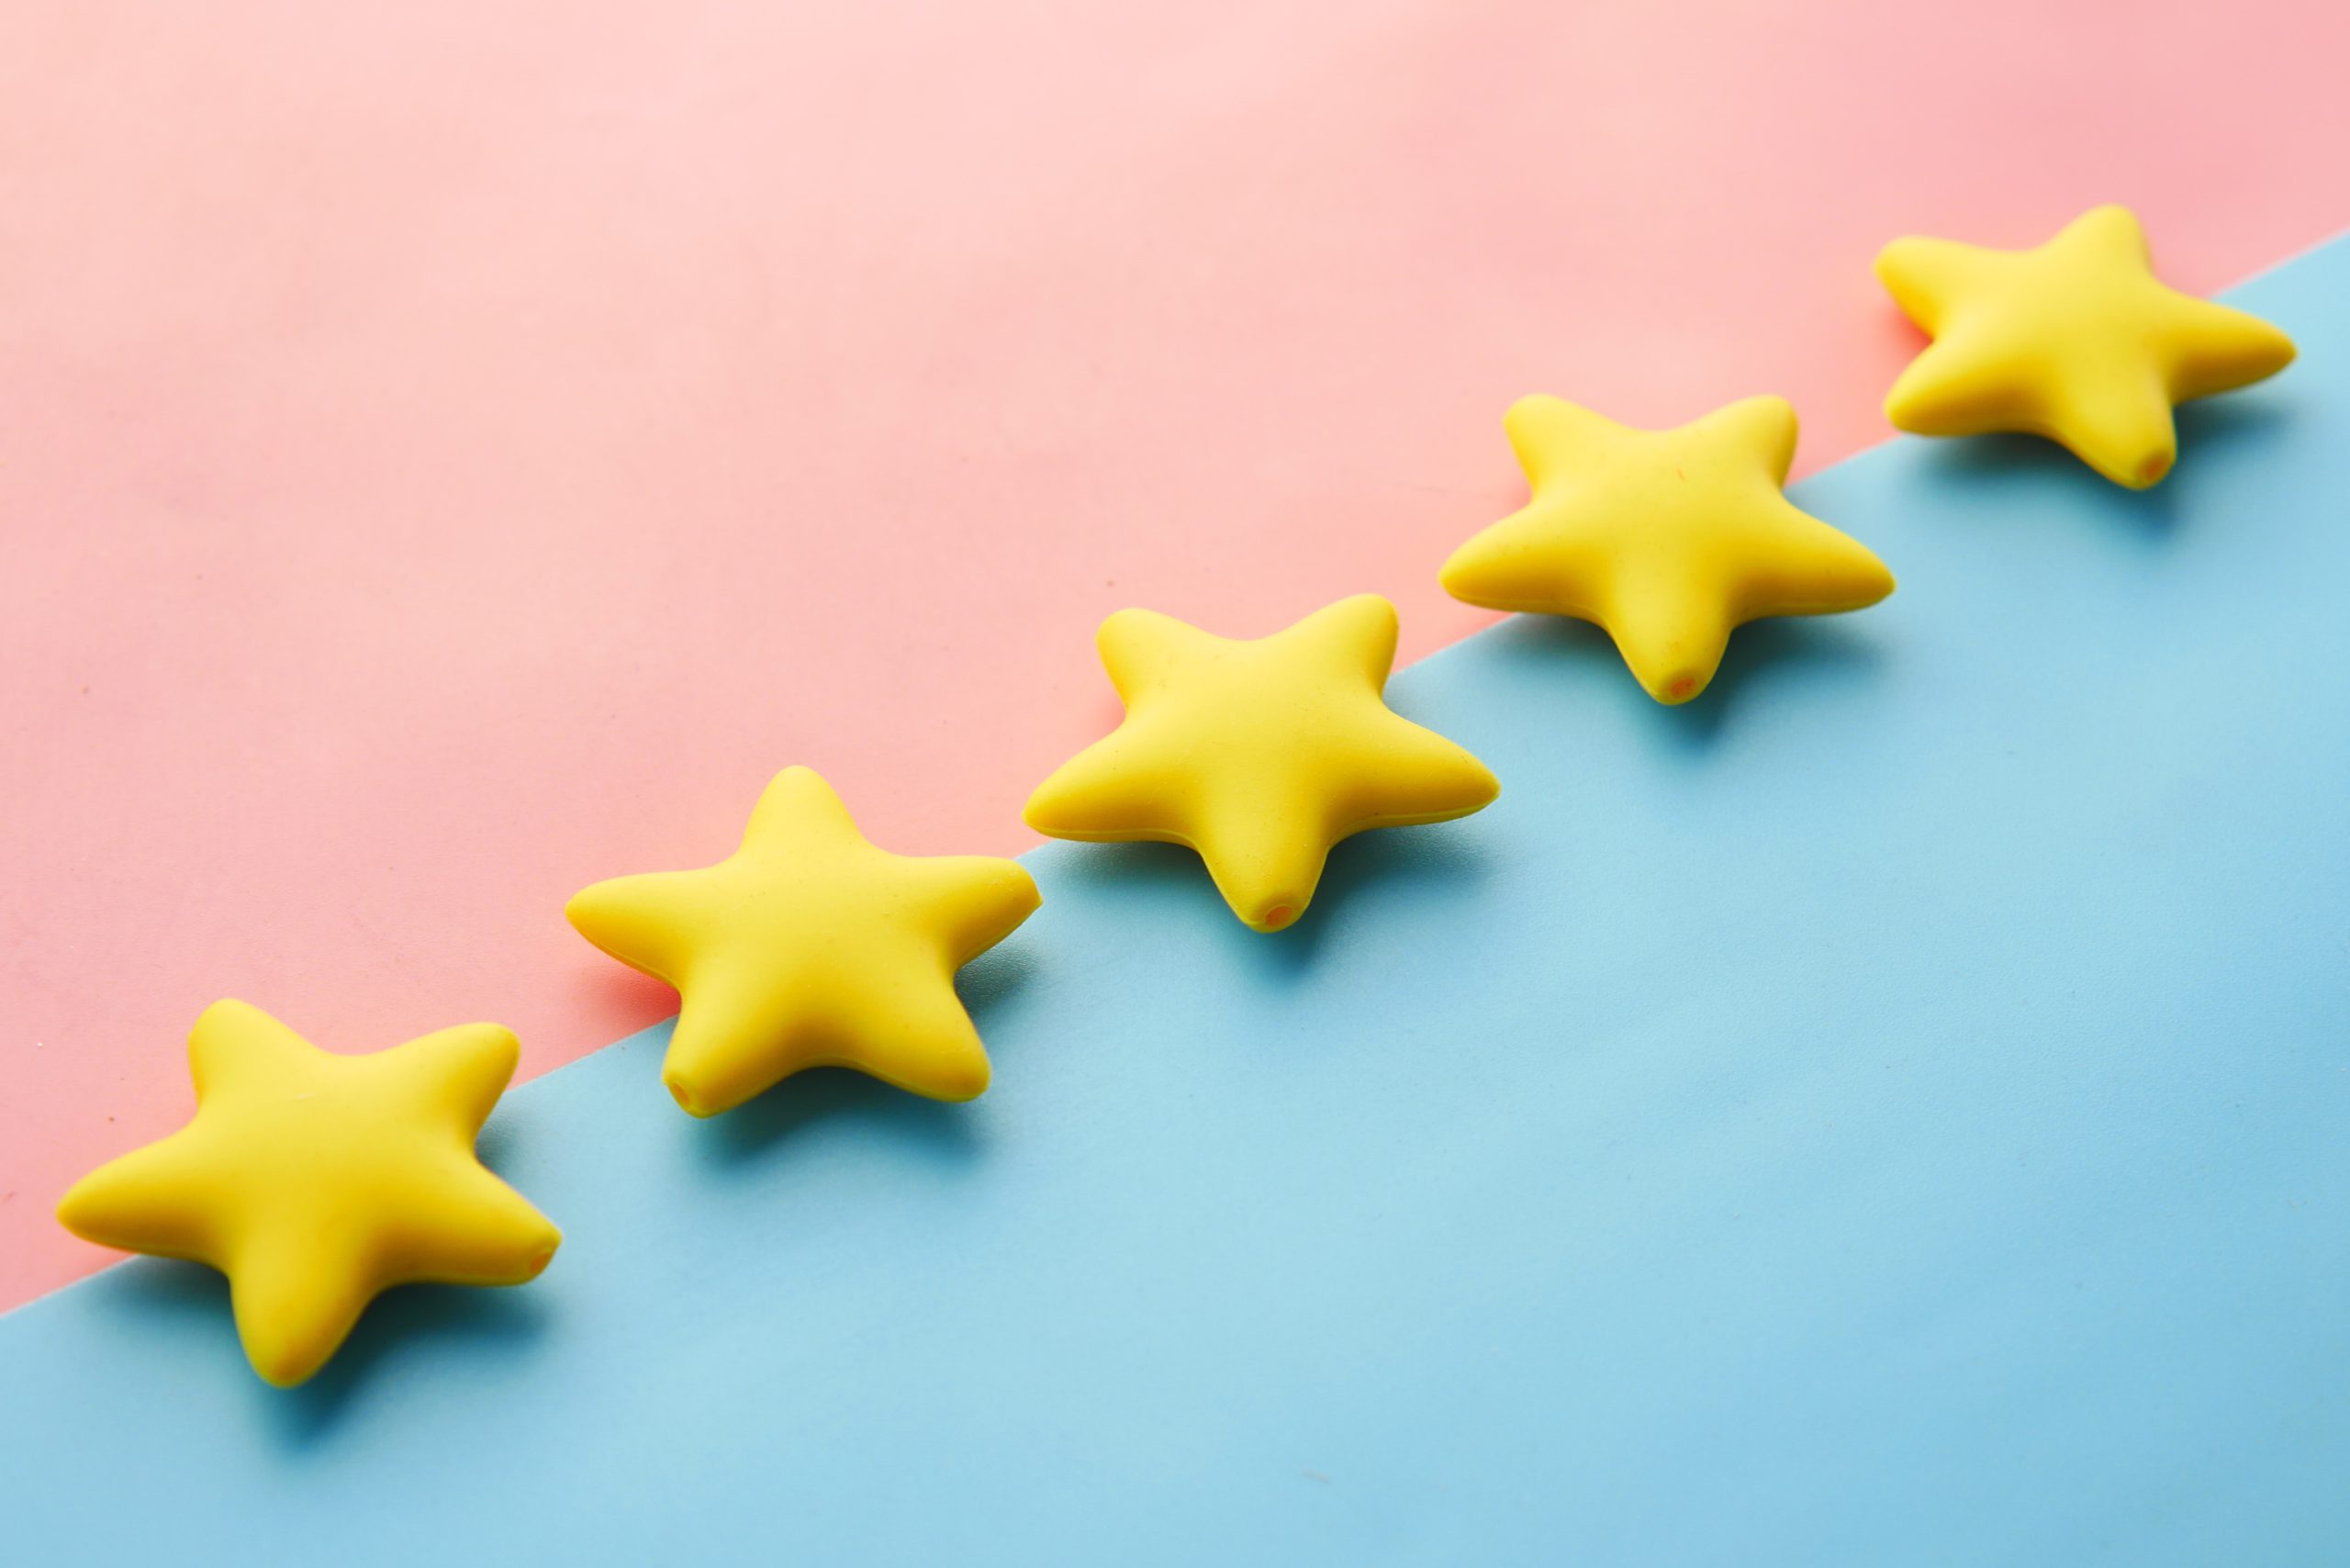 Five stars lined up on a blue and pink background